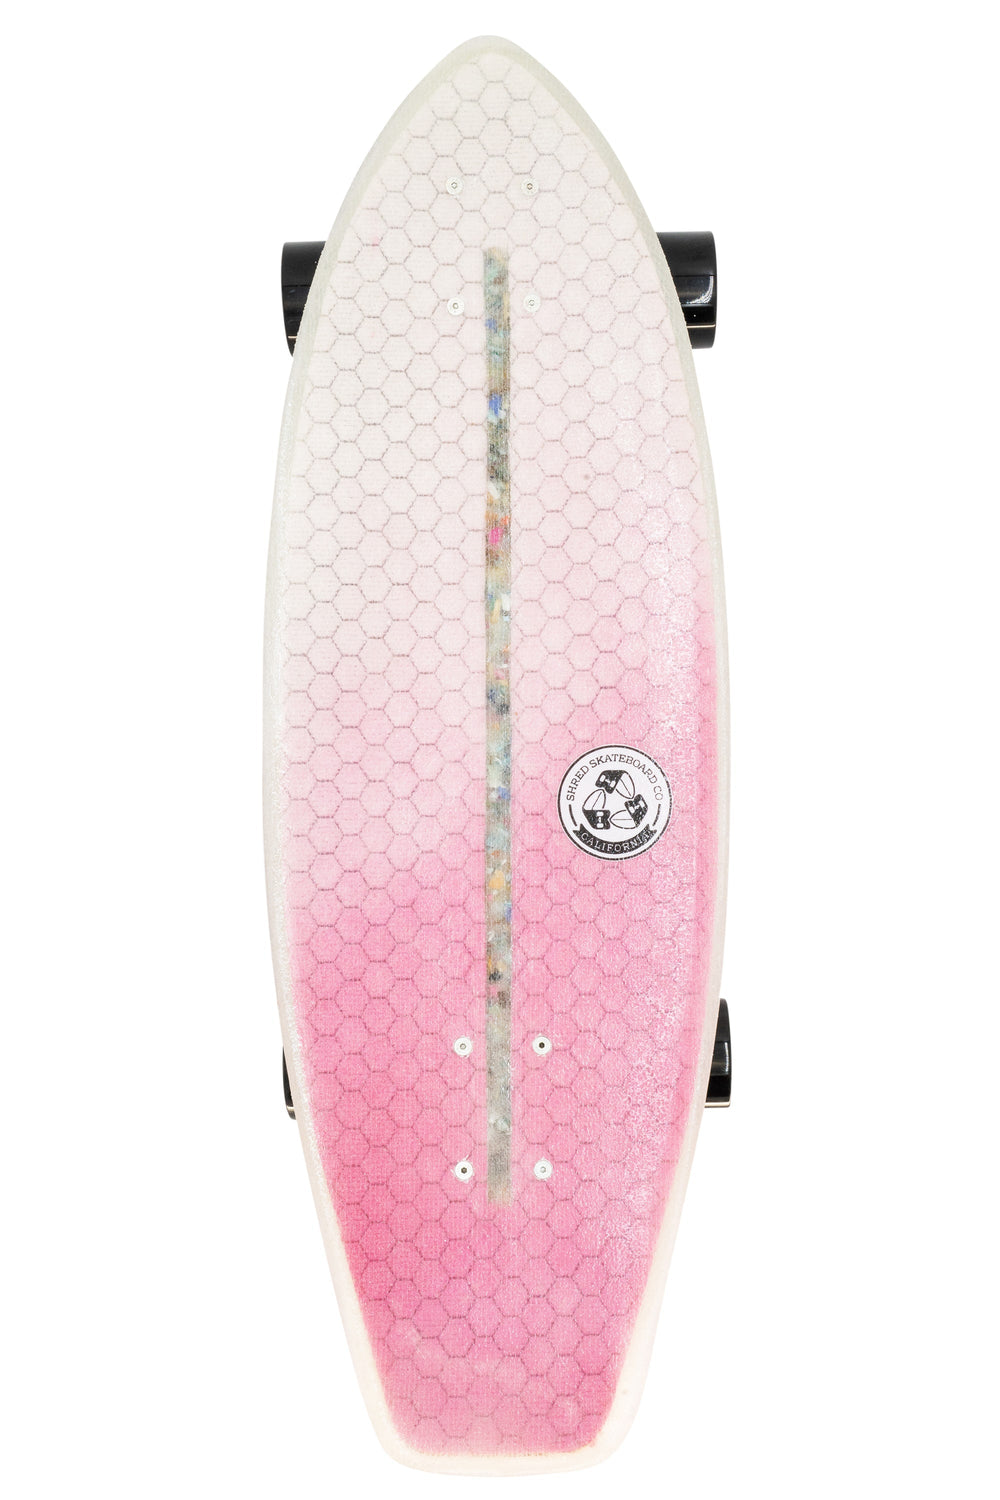 Surfskate - Electrical Ninja (30”) - Color Fade Hot Pink by Shred Skateboard Co